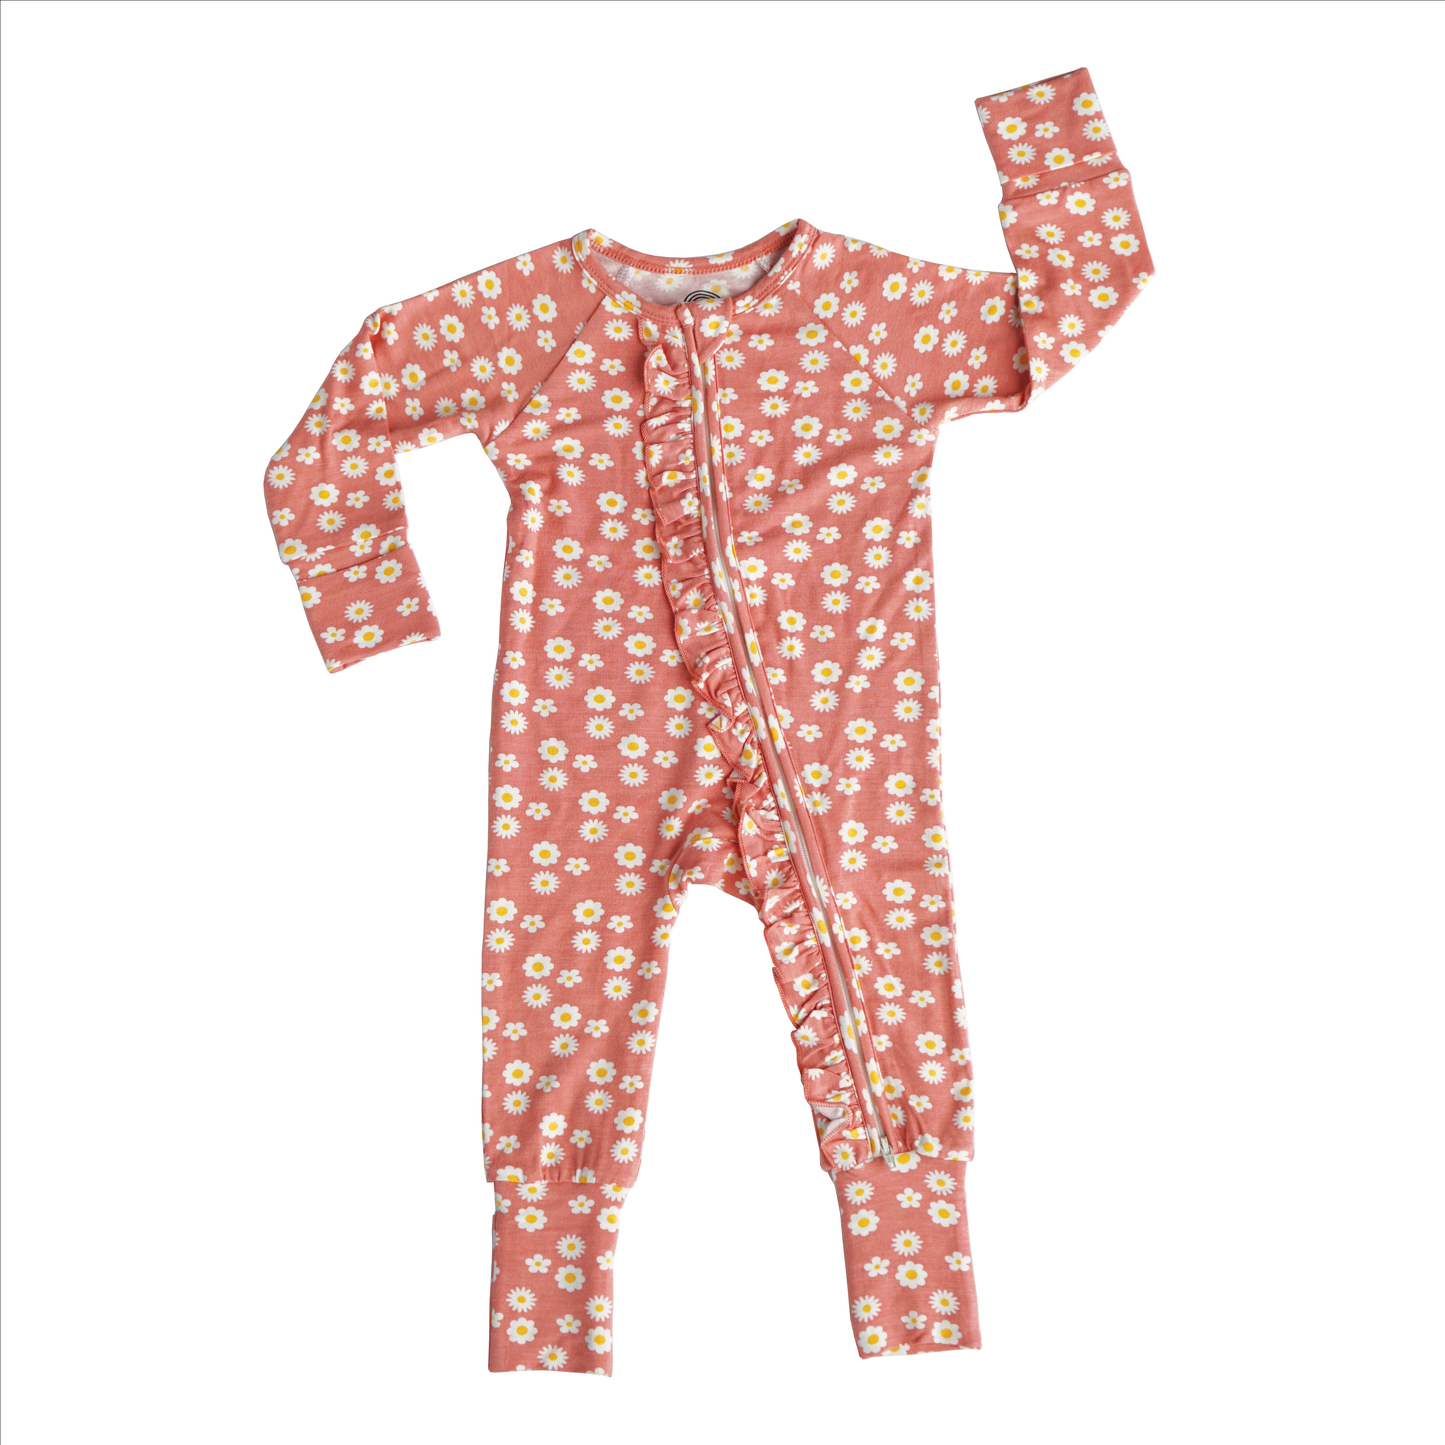 Emerson and Friends infant girl ruffle convertible romper